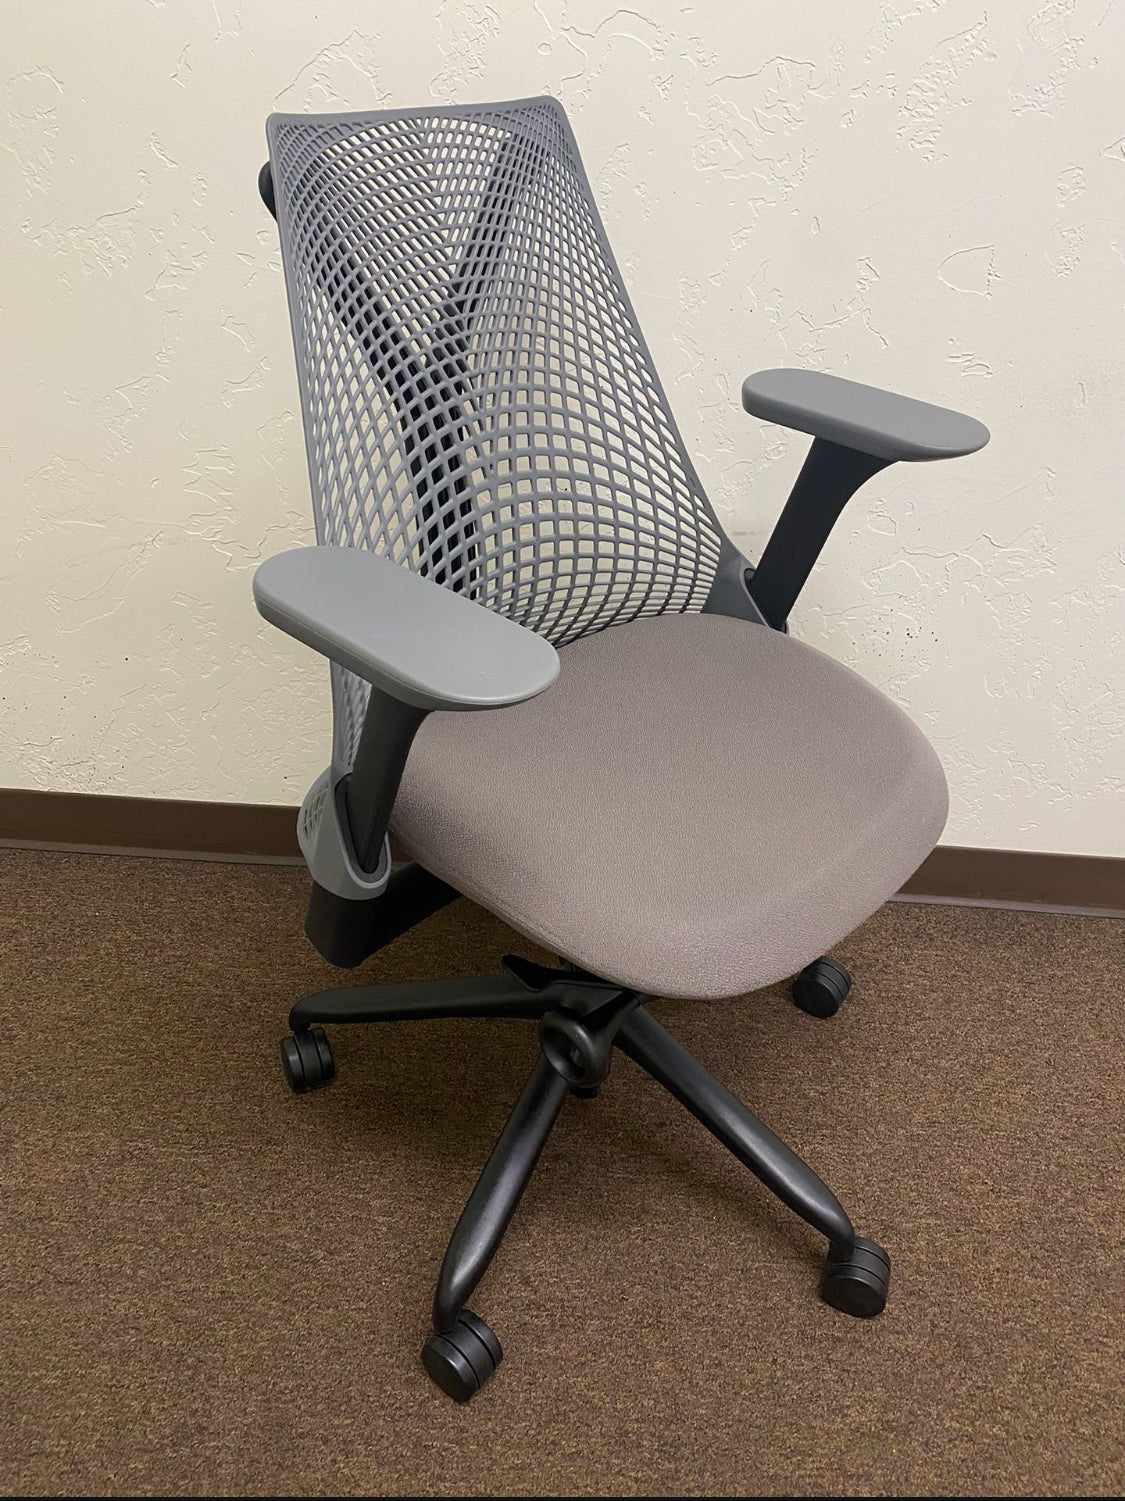 Herman Miller Sayl fully loaded model office chair/ gaming chair